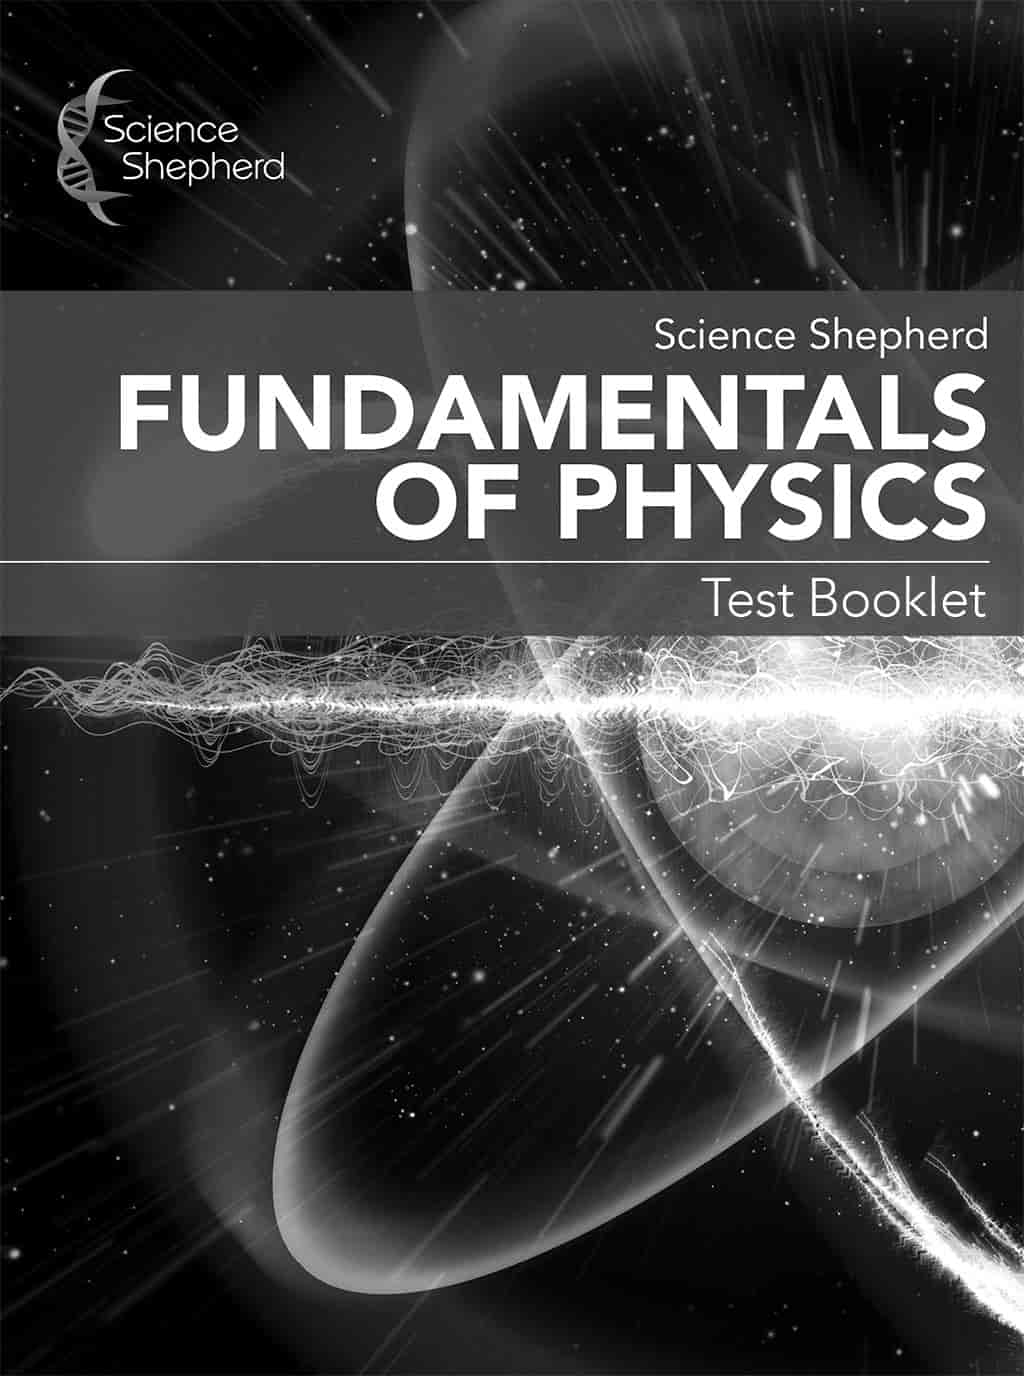 Fundamentals of Physics homeschool videos test booklet cover in grayscale